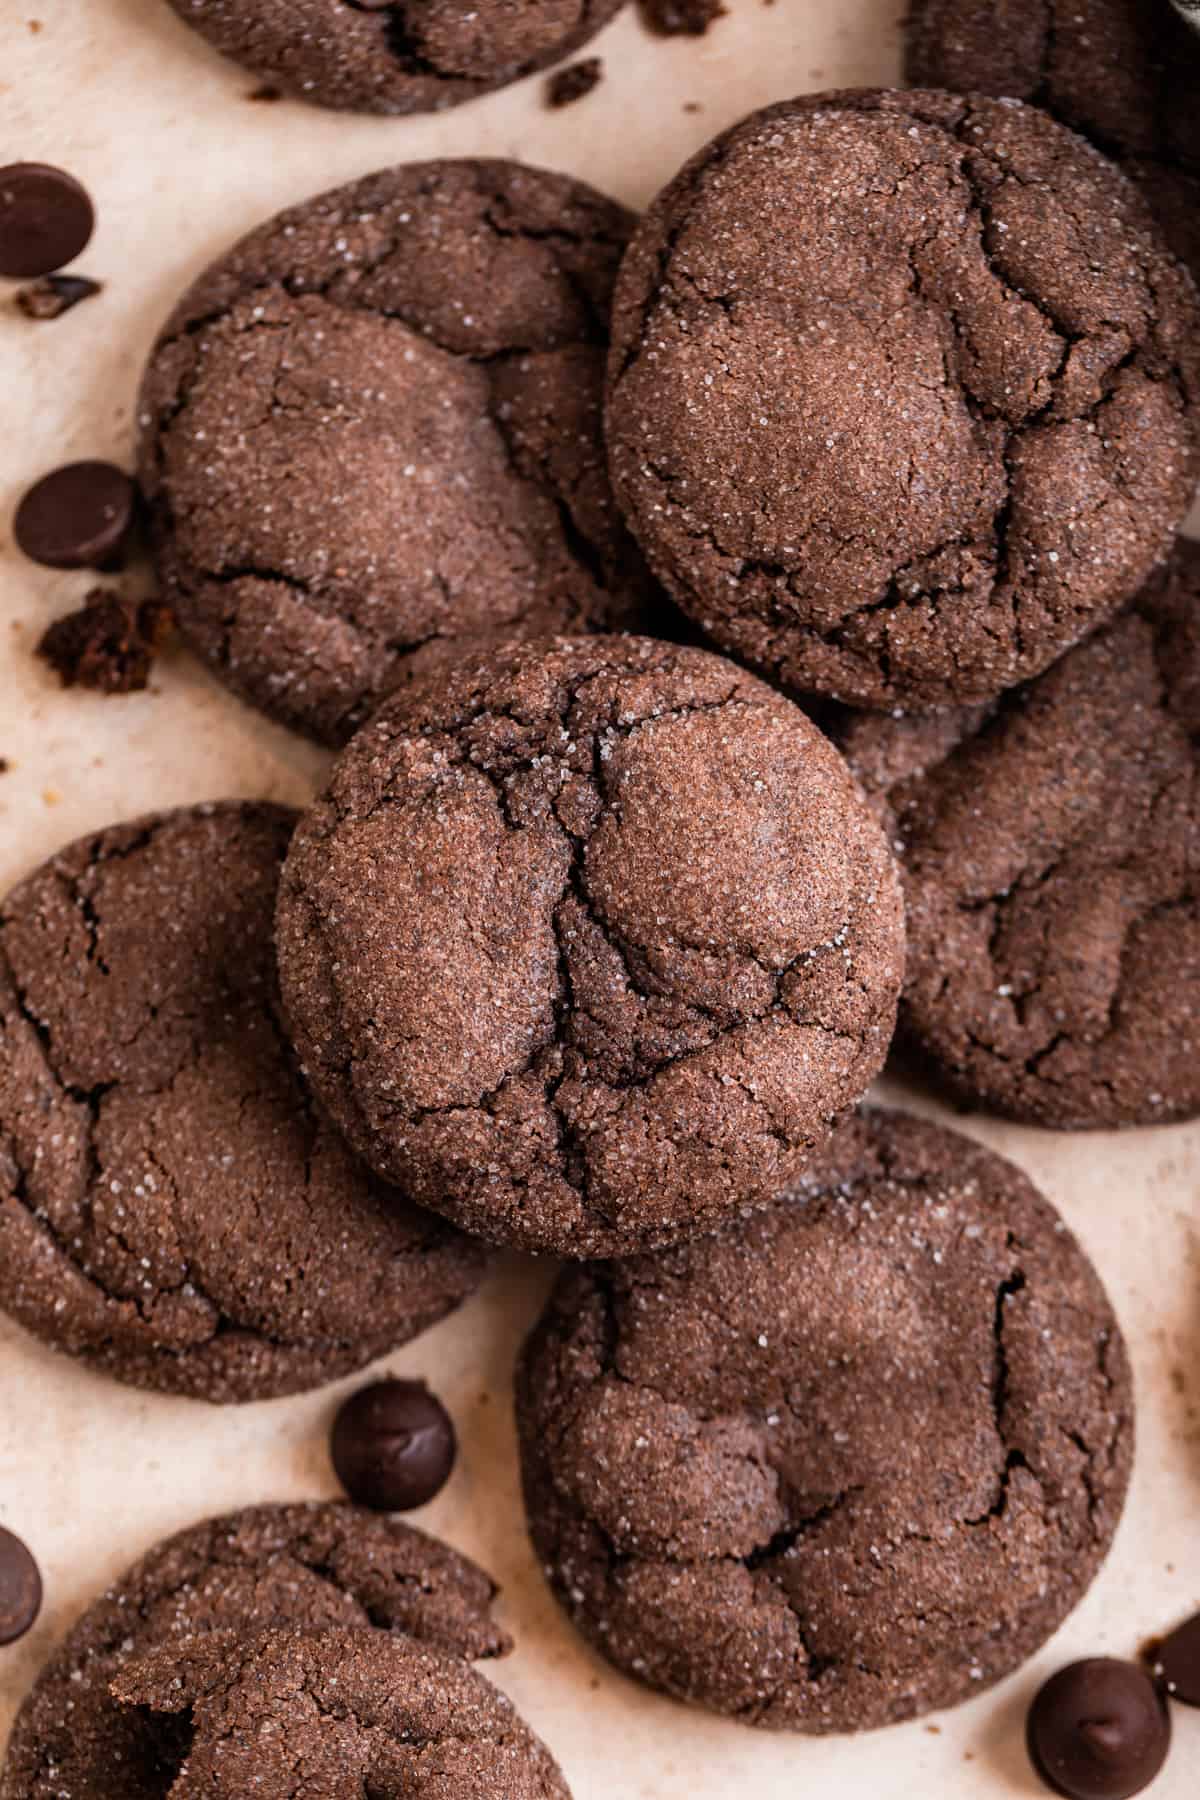 Chocolate cookies arranged on counter with chocolate chips and crumbs surrounding.